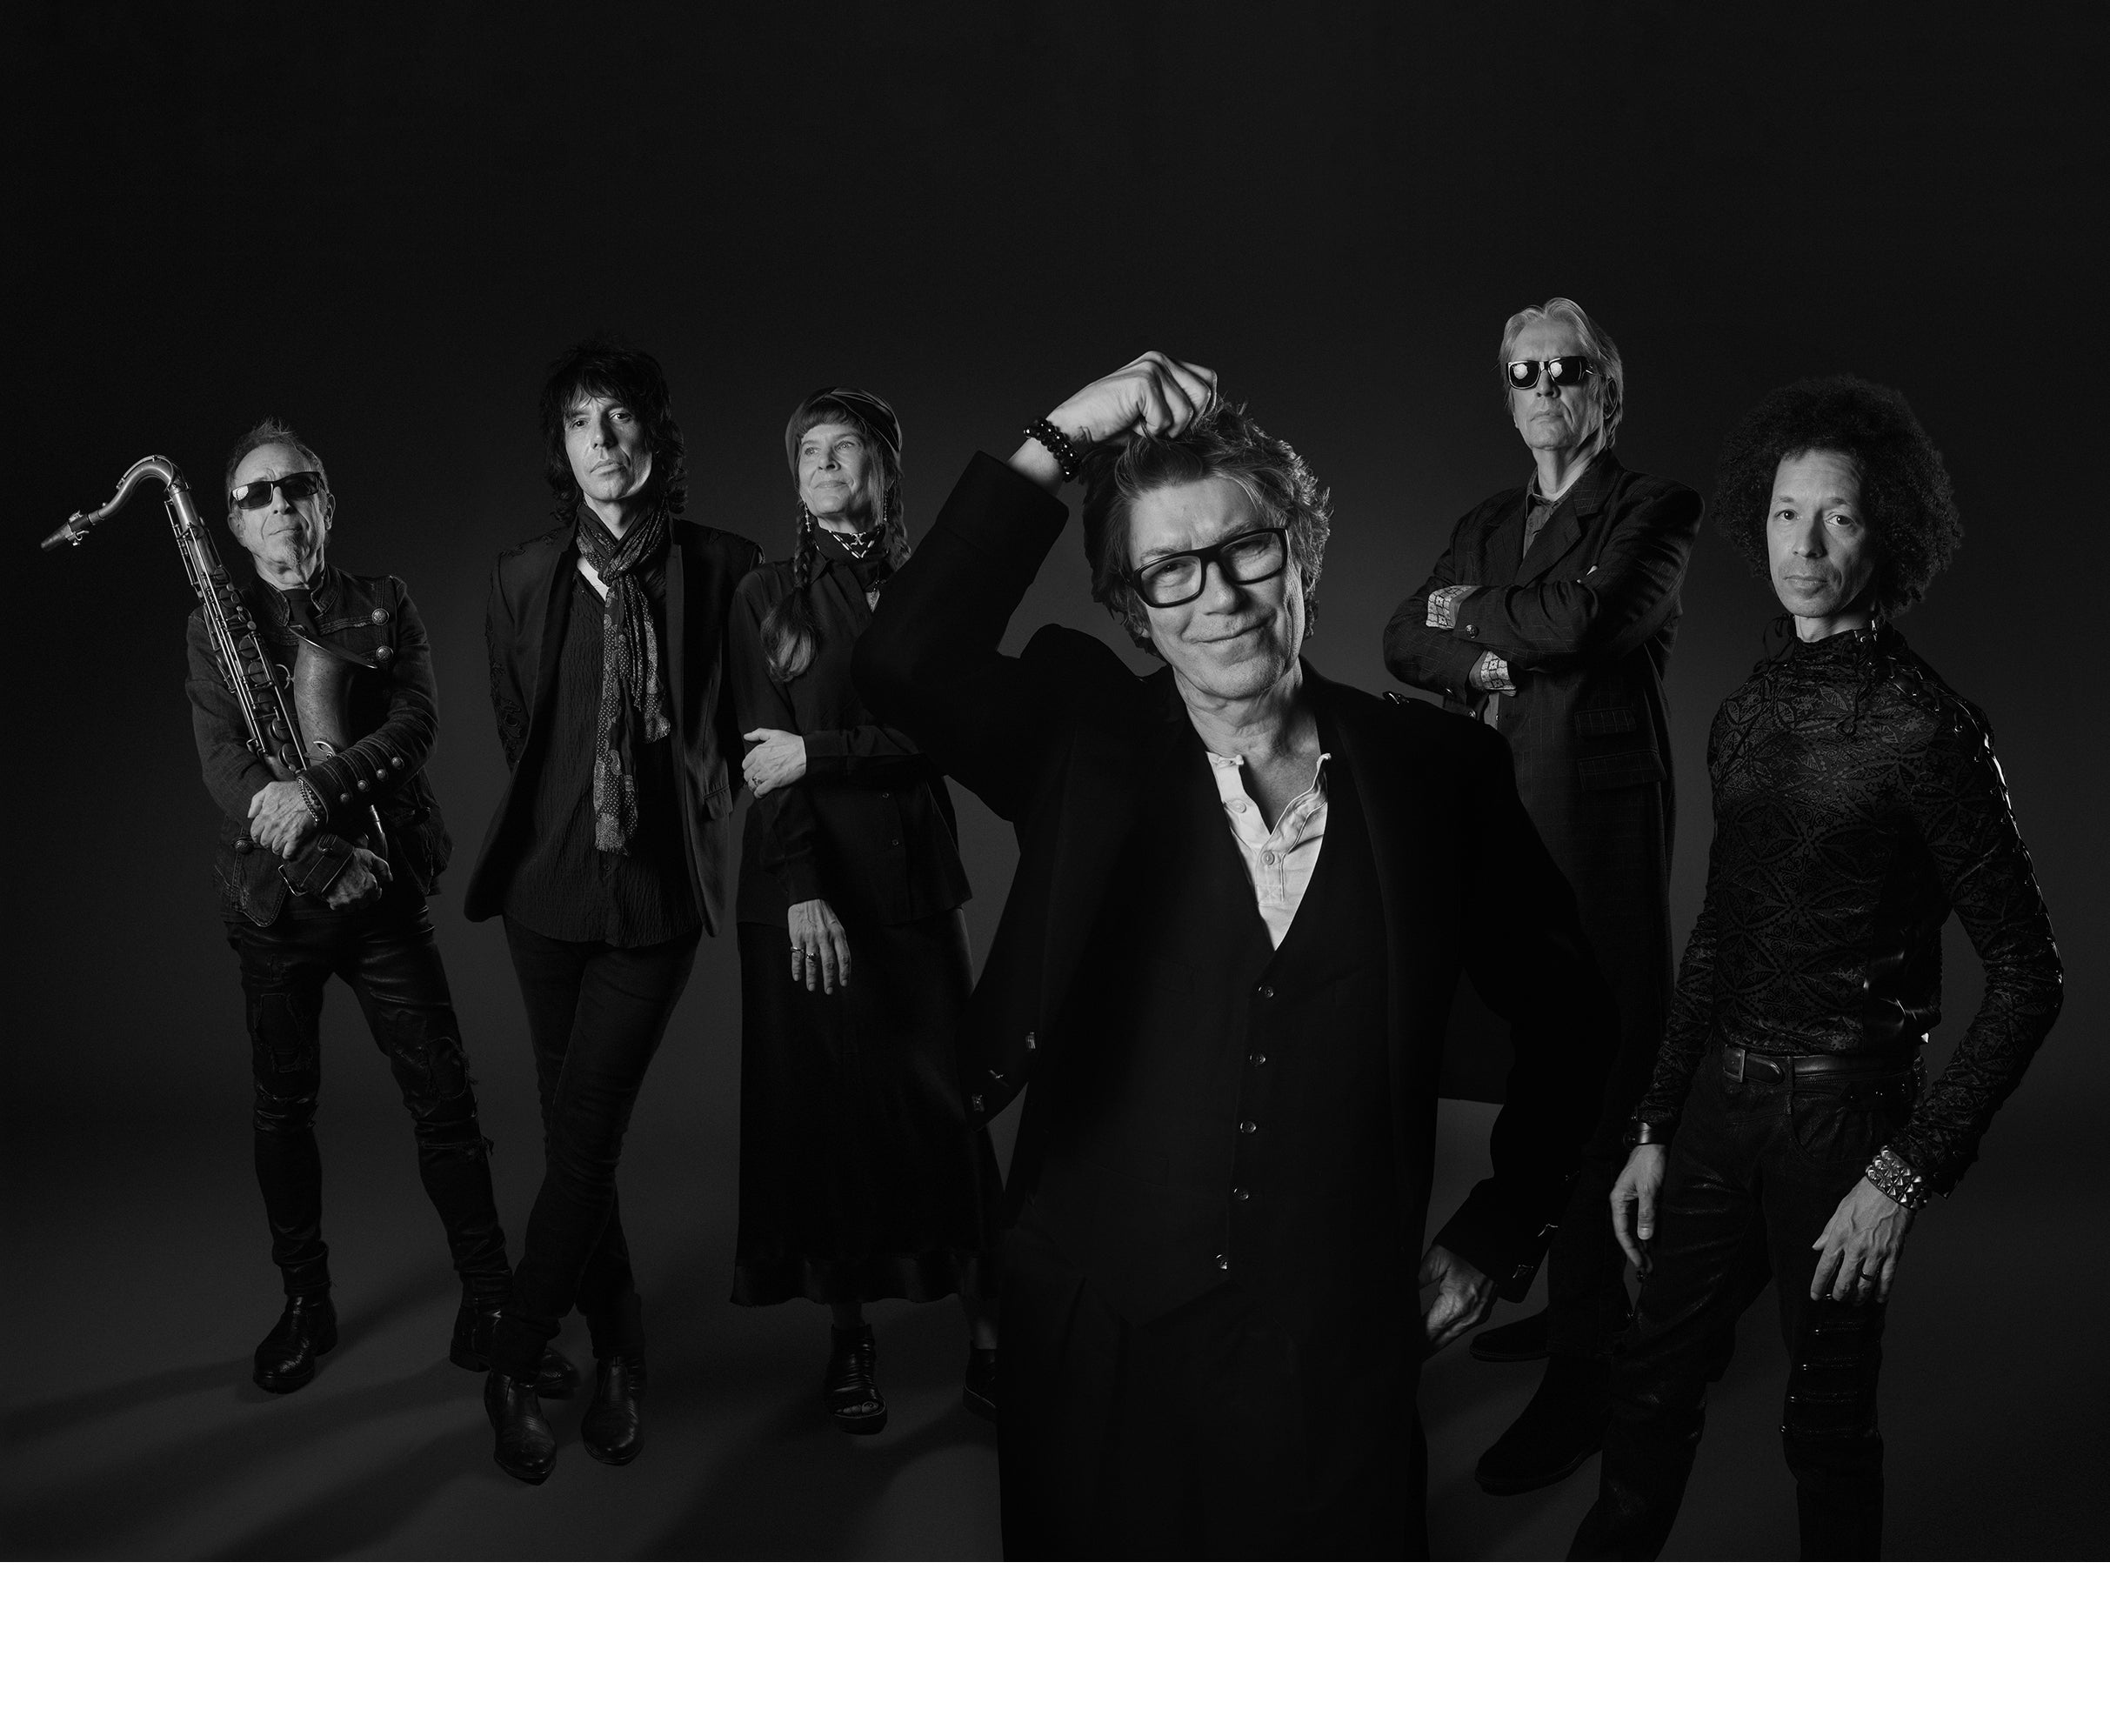 The Psychedelic Furs / Squeeze 2023 Tour at The Sound